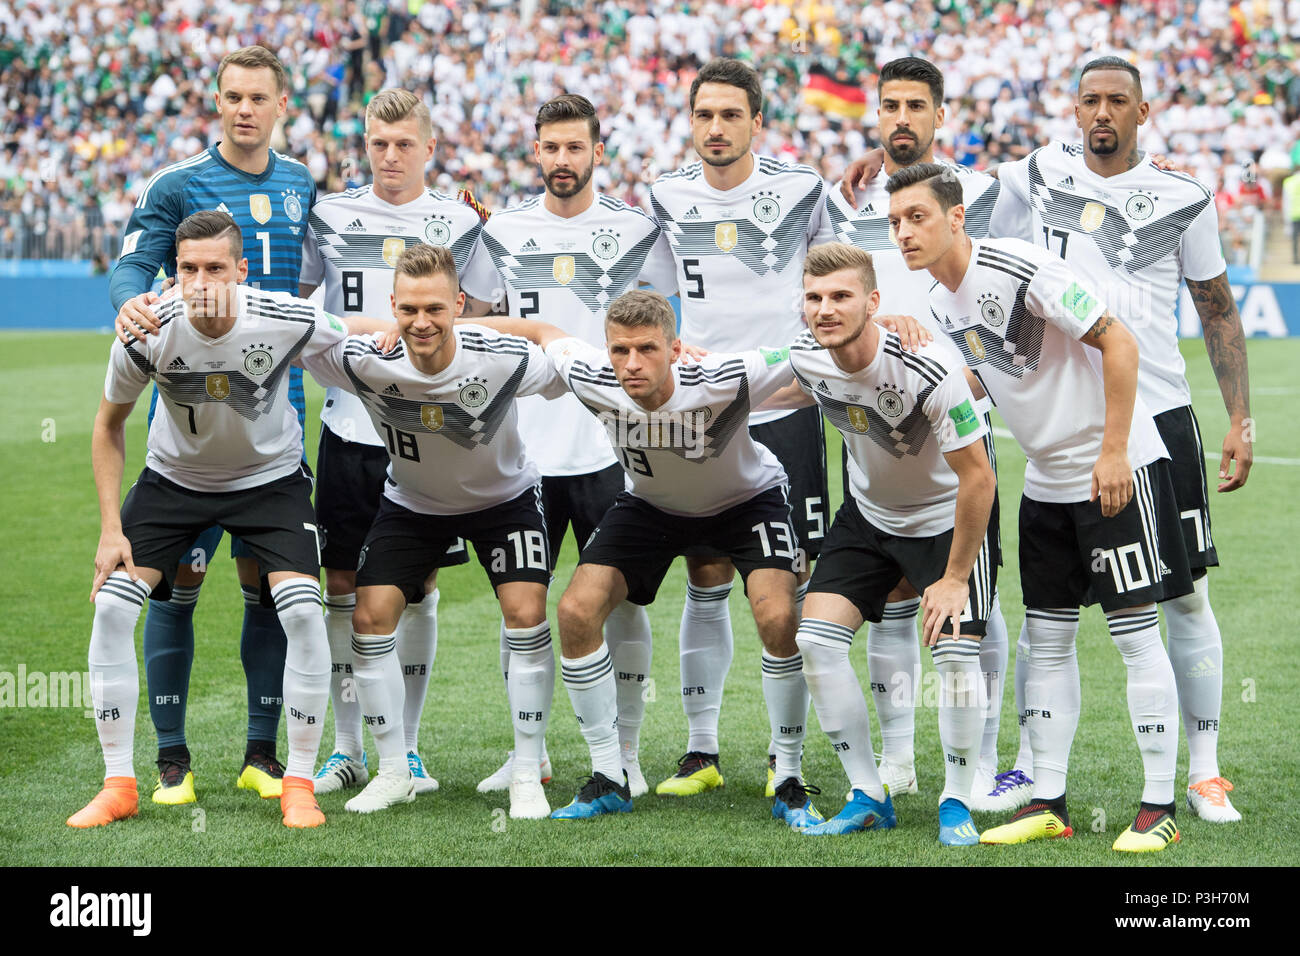 ORleft to right goalkeeper Manuel NEUER (GER), Joshua KIMMICH (GER), Marvin PLATTENHARDT (GER), Mats HUMMELS (GER), Sami KHEDIRA (GER), Jerome BOATENG (GER), uRleft to right Julian DRAXLER (GER), Joshua KIMMICH (GER), Thomas MUELLER (Mssler, GER), Timo WERNER (GER), Mesut OEZIL (Ozil, GER), team photo, team photo, group picture, full figure, landscape, Germany (GER) - Mexico (MEX) 0: 1, Preliminary Round, Group F, Game 11, on 17.06.2018 in Moscow; Football World Cup 2018 in Russia from 14.06. - 15.07.2018. | usage worldwide Stock Photo